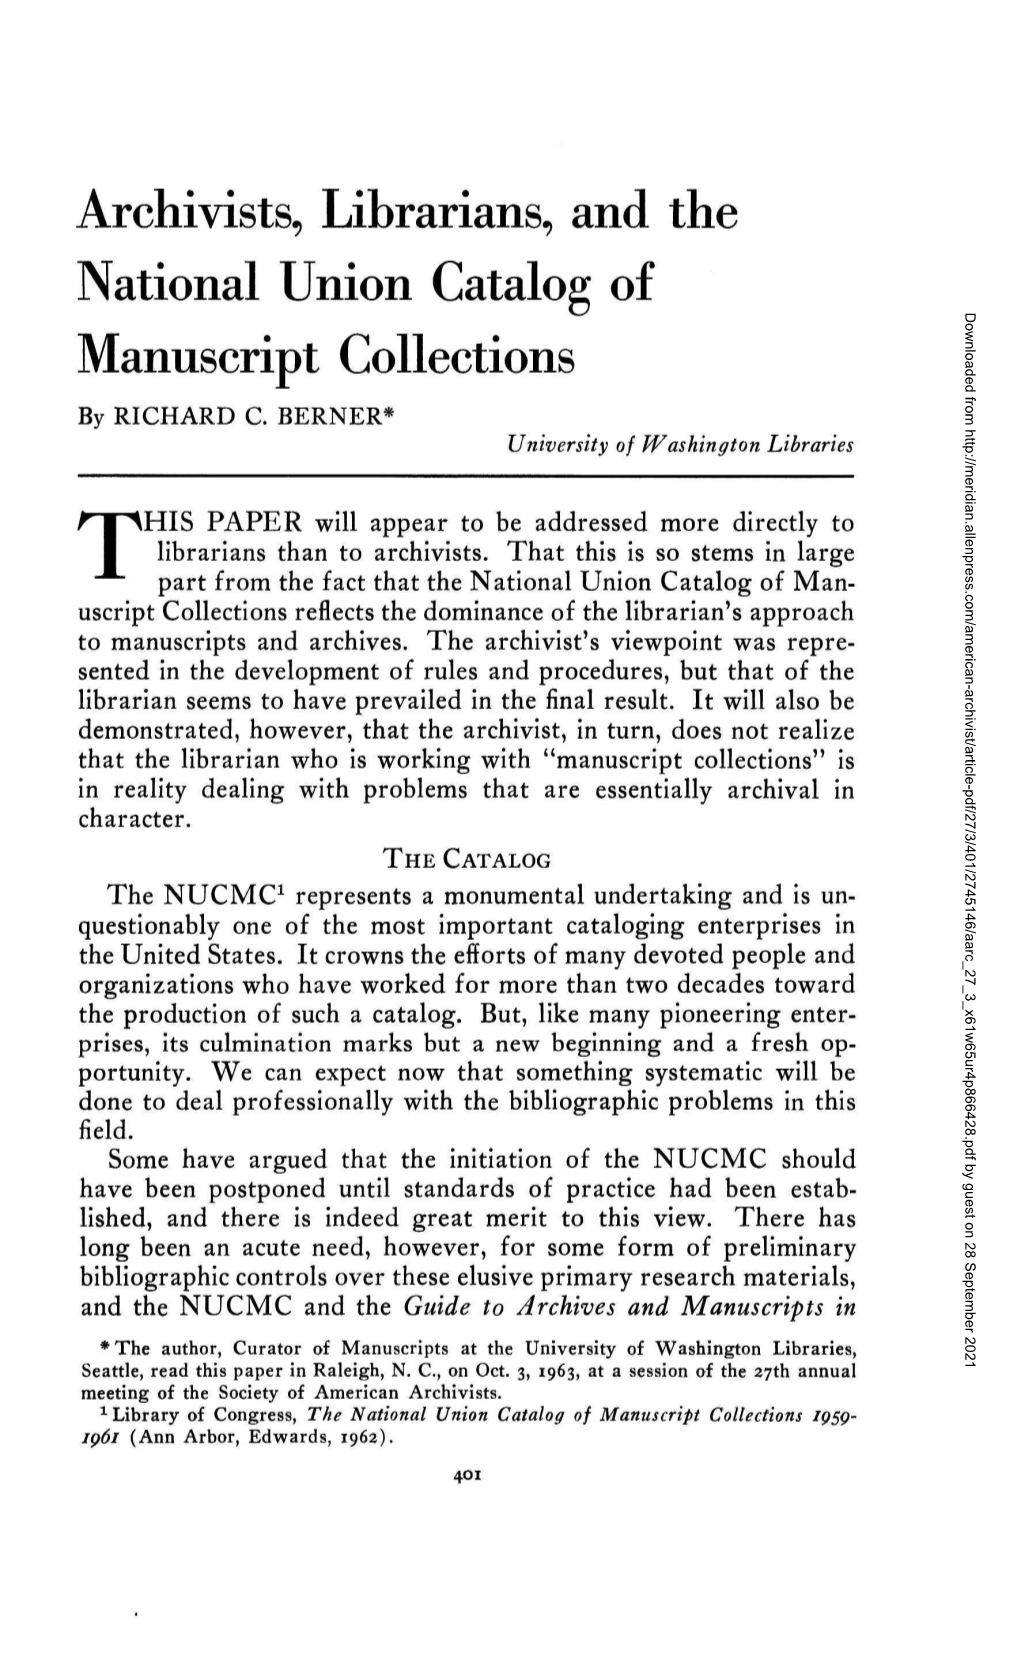 Archivists, Librarians, and the National Union Catalog of Manuscript